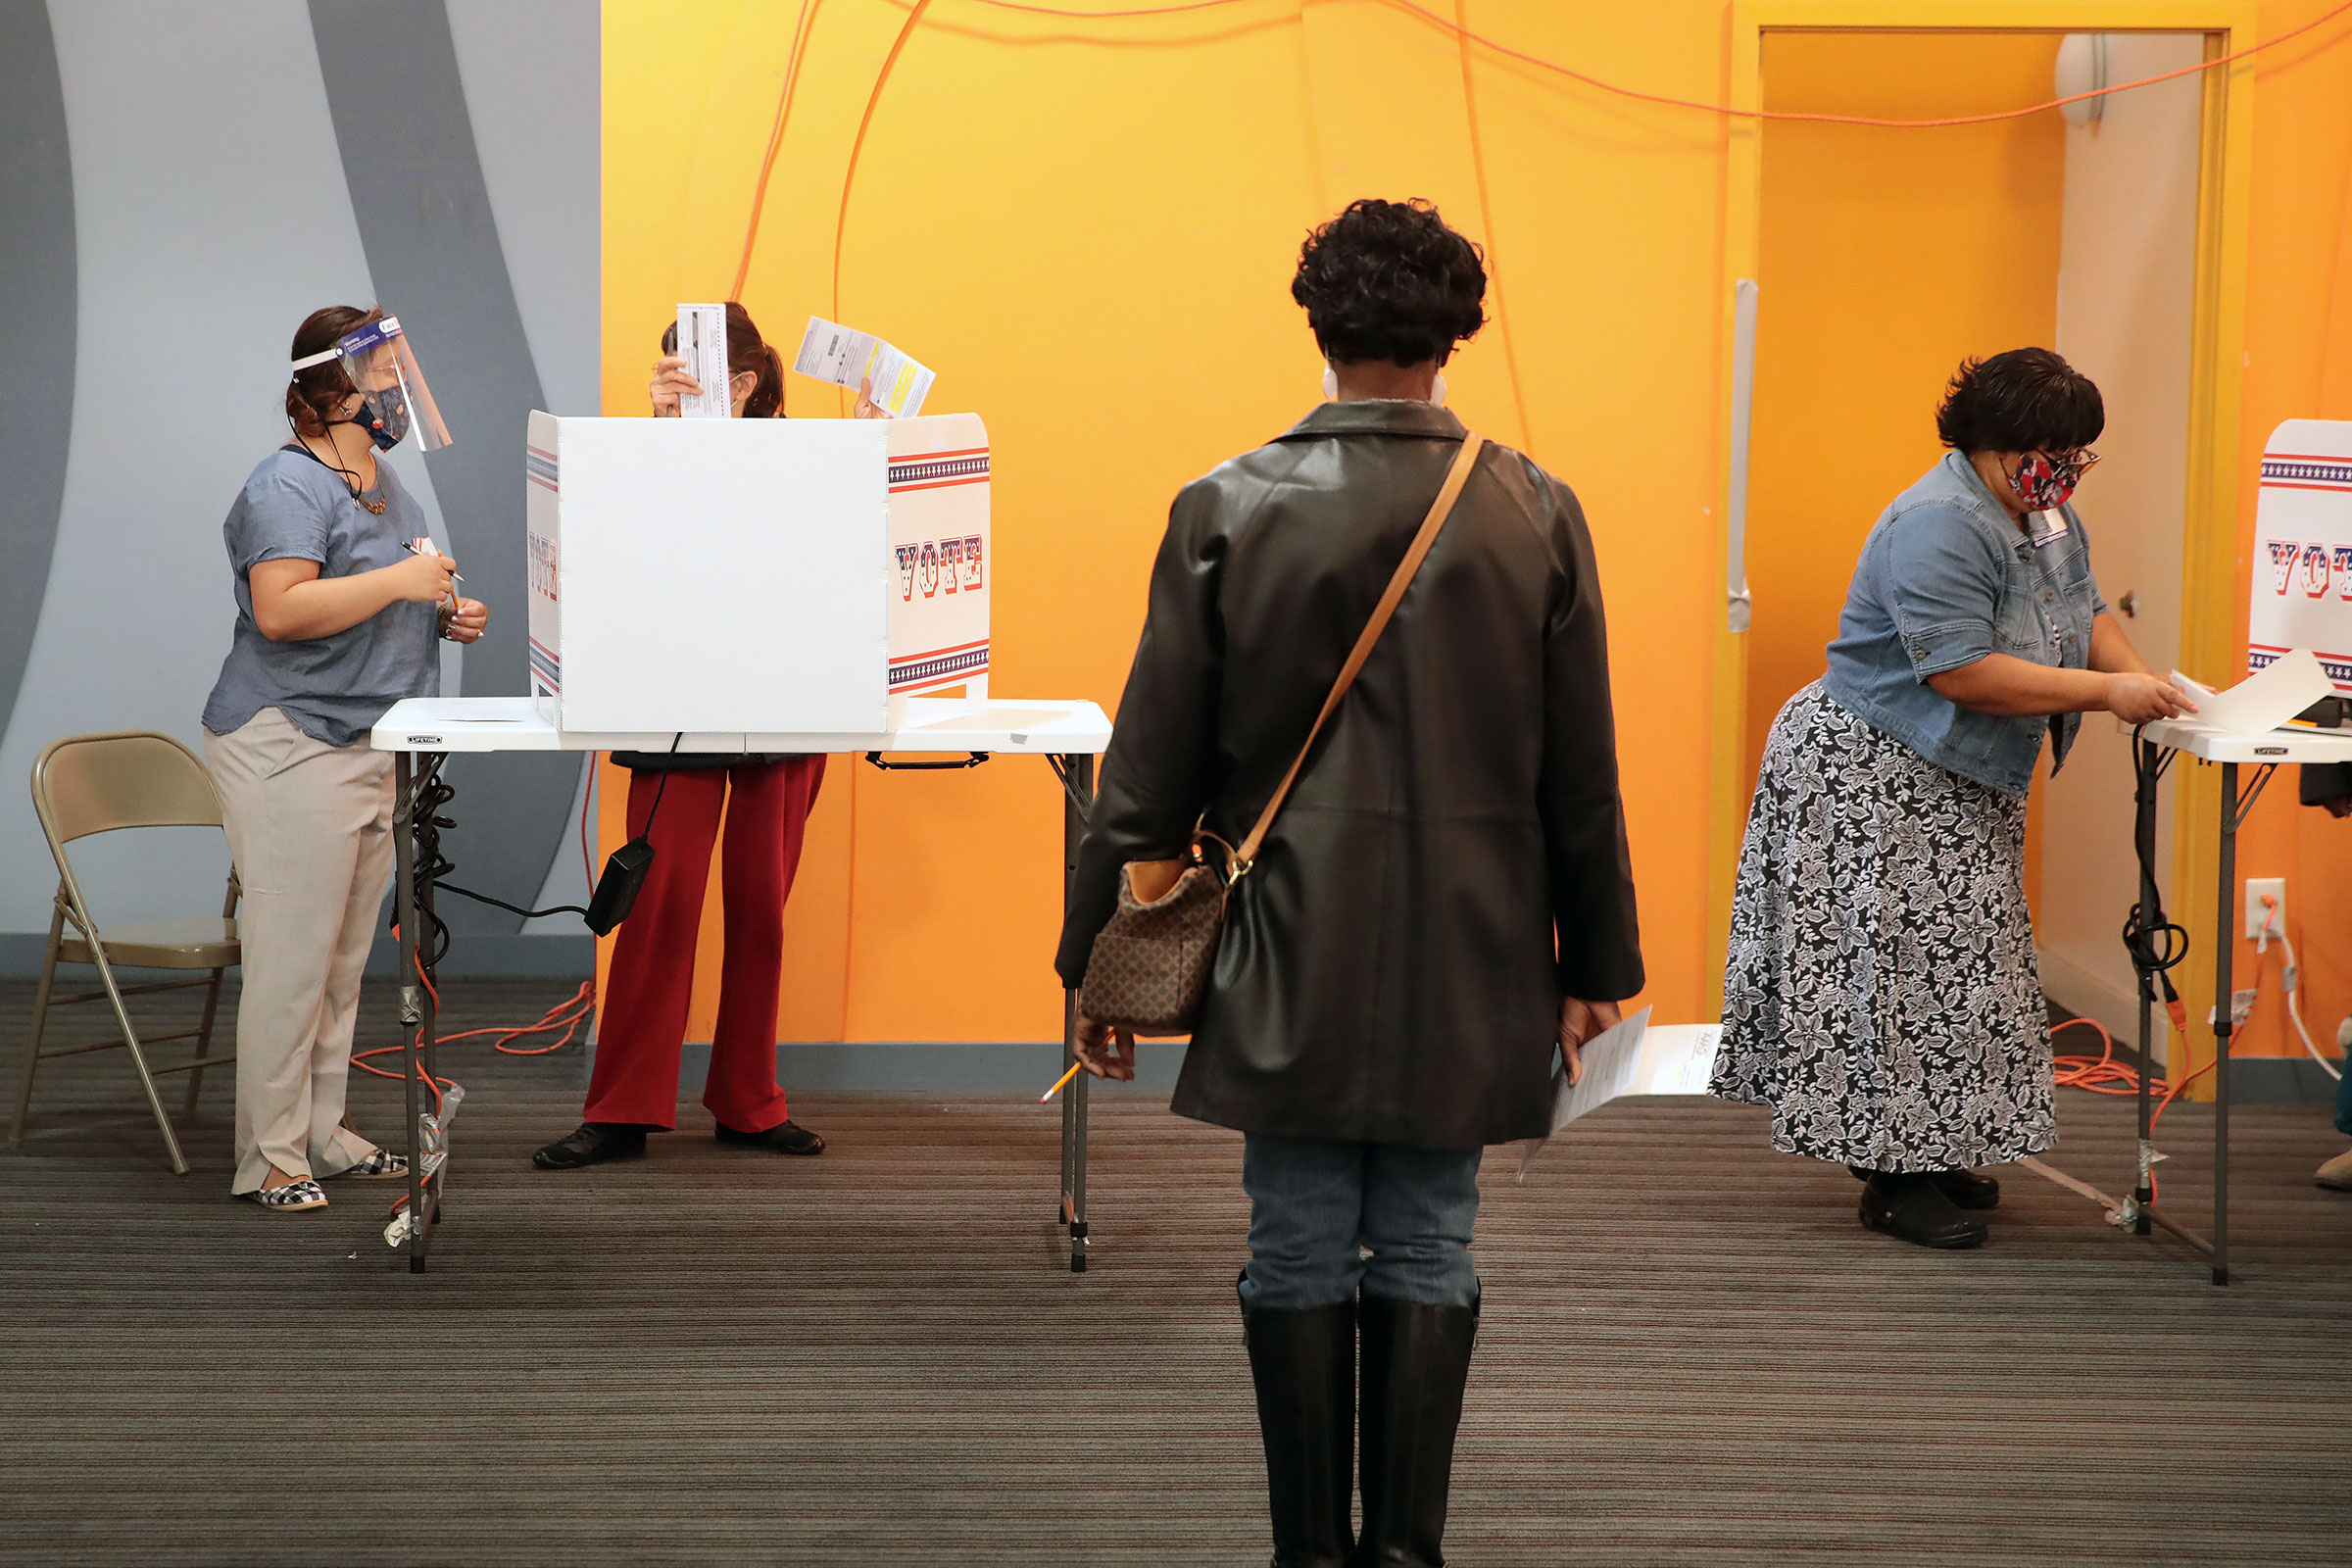 Residents vote at a polling place in the Midtown neighborhood in Milwaukee, Wisconsin on Oct. 20, 2020. (Scott Olson—Getty Images)